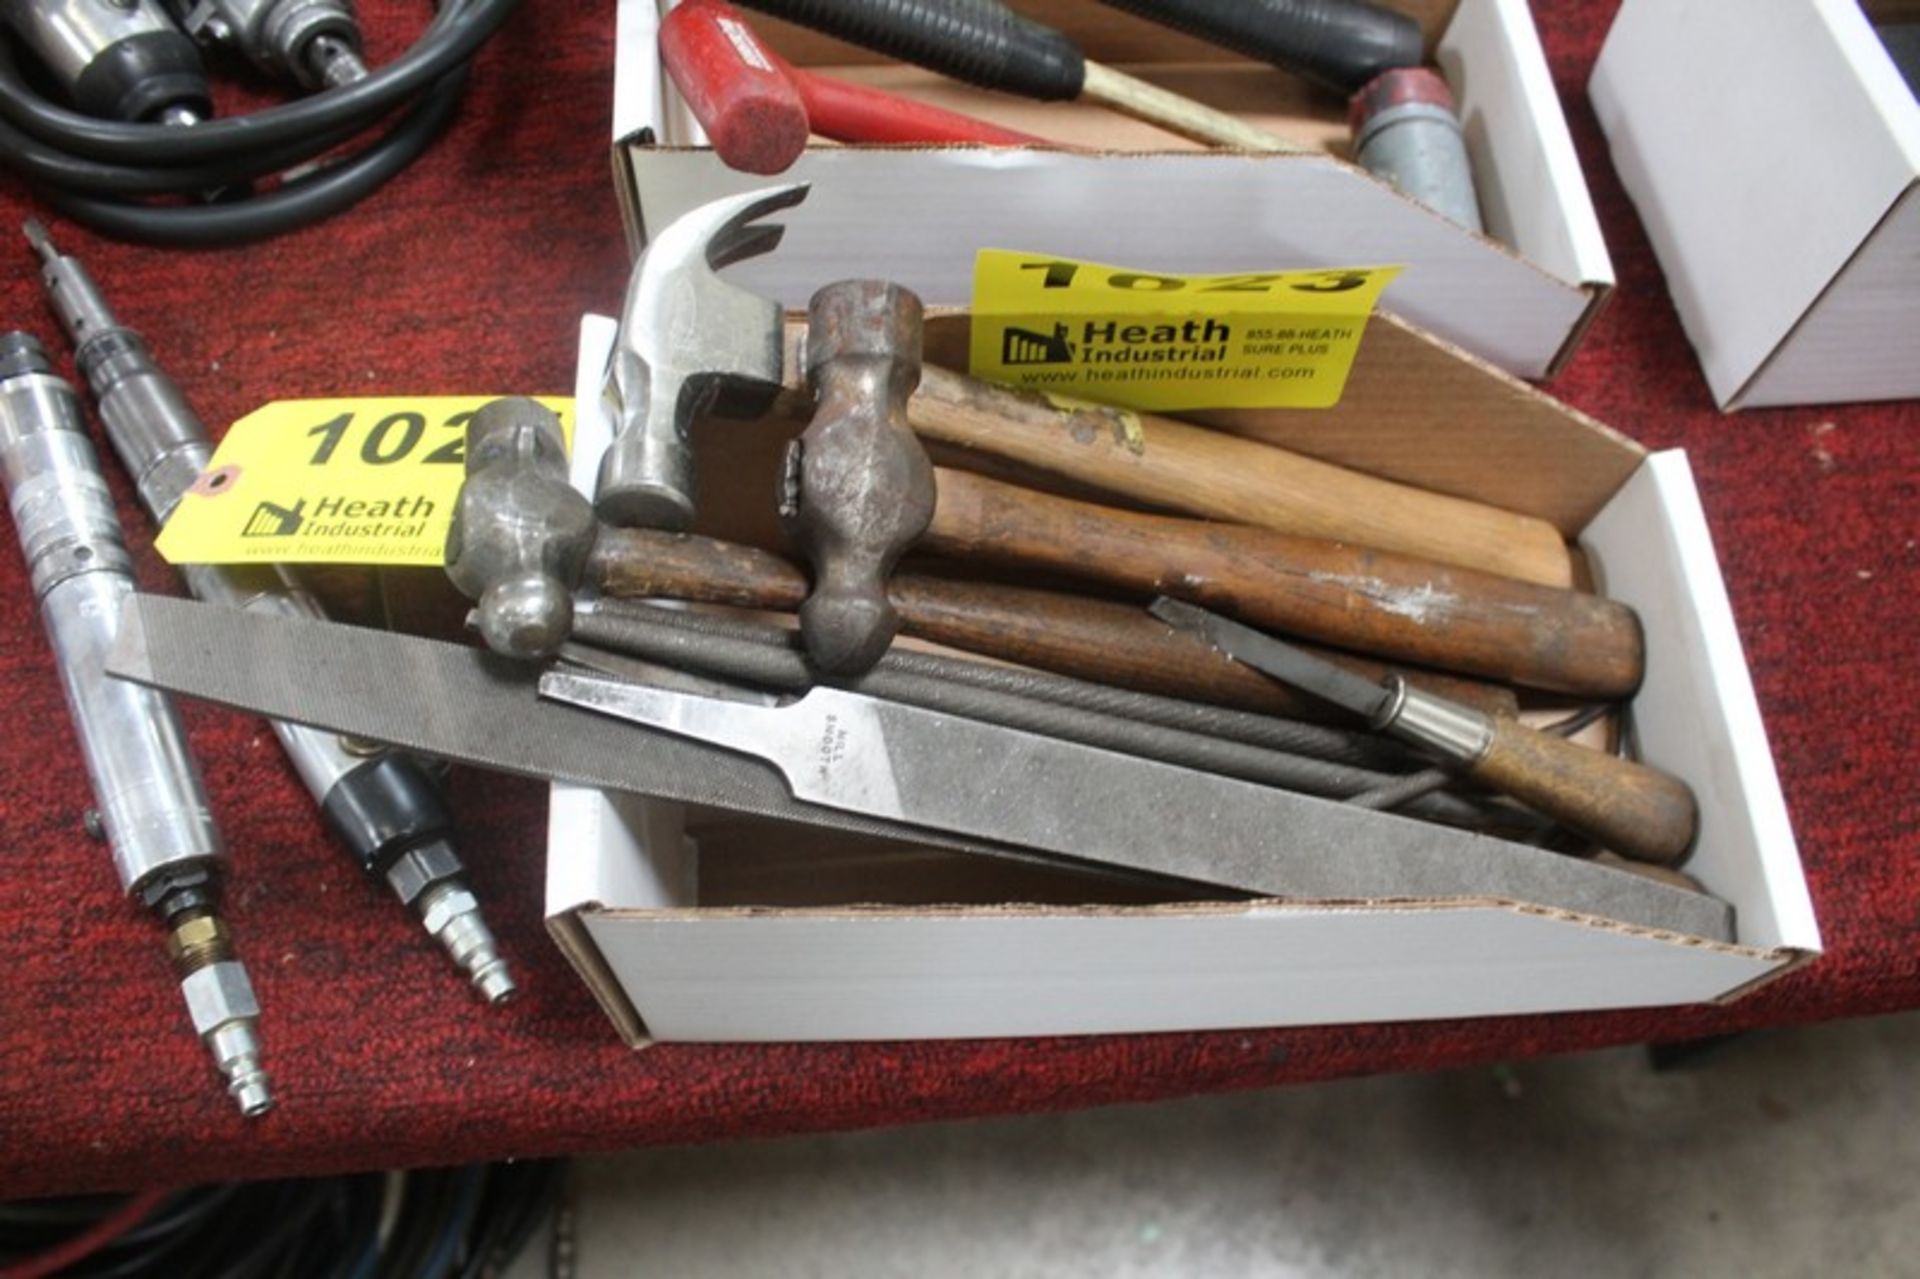 HAMMERS & FILES IN BOX